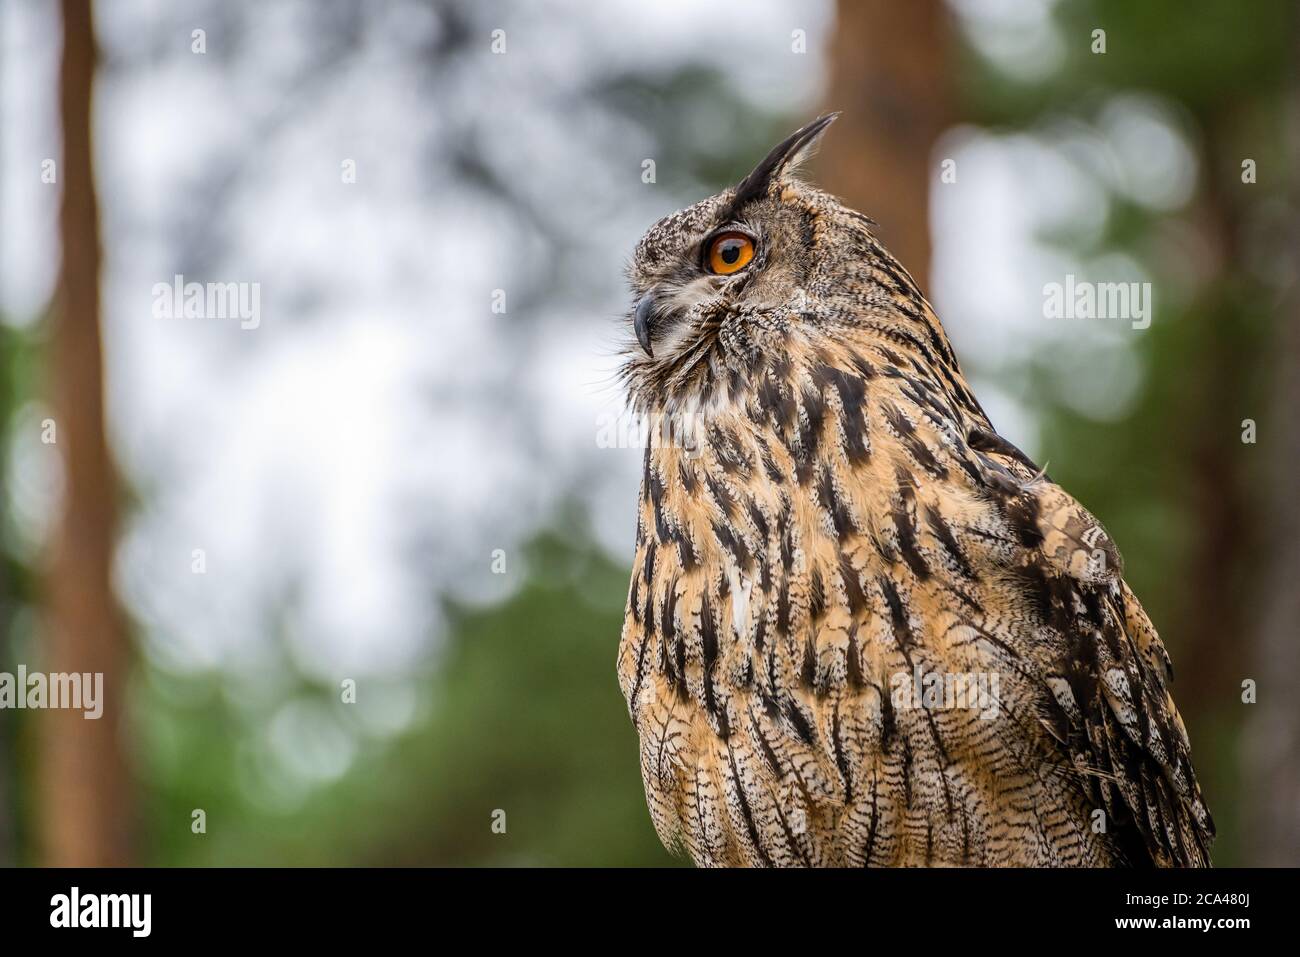 The Eurasian eagle-owl (Bubo bubo) is a species of eagle-owl that resides in much of Eurasia. Stock Photo